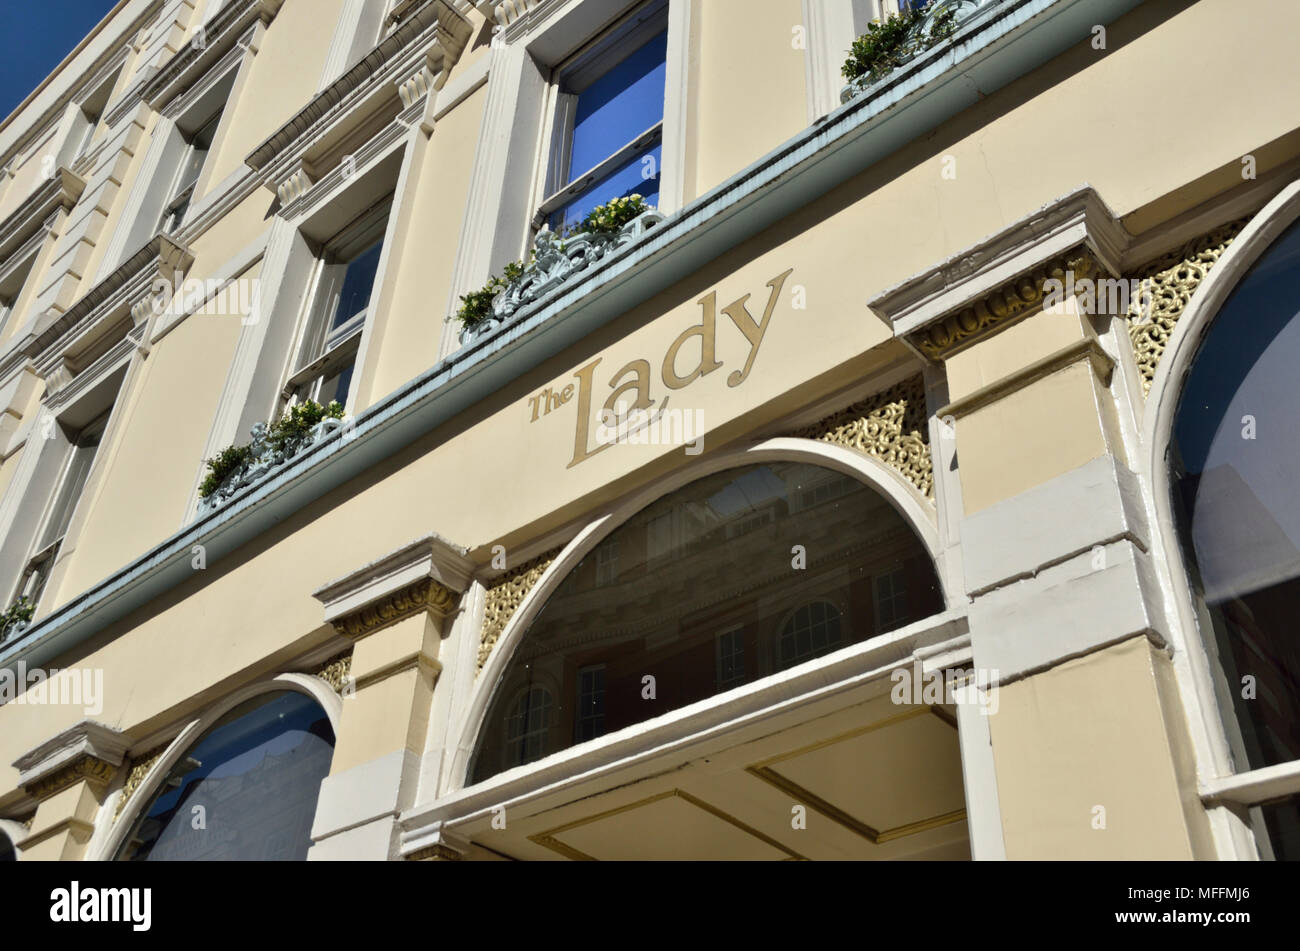 The Lady magazine headquarters in Covent Garden, London, UK. Stock Photo